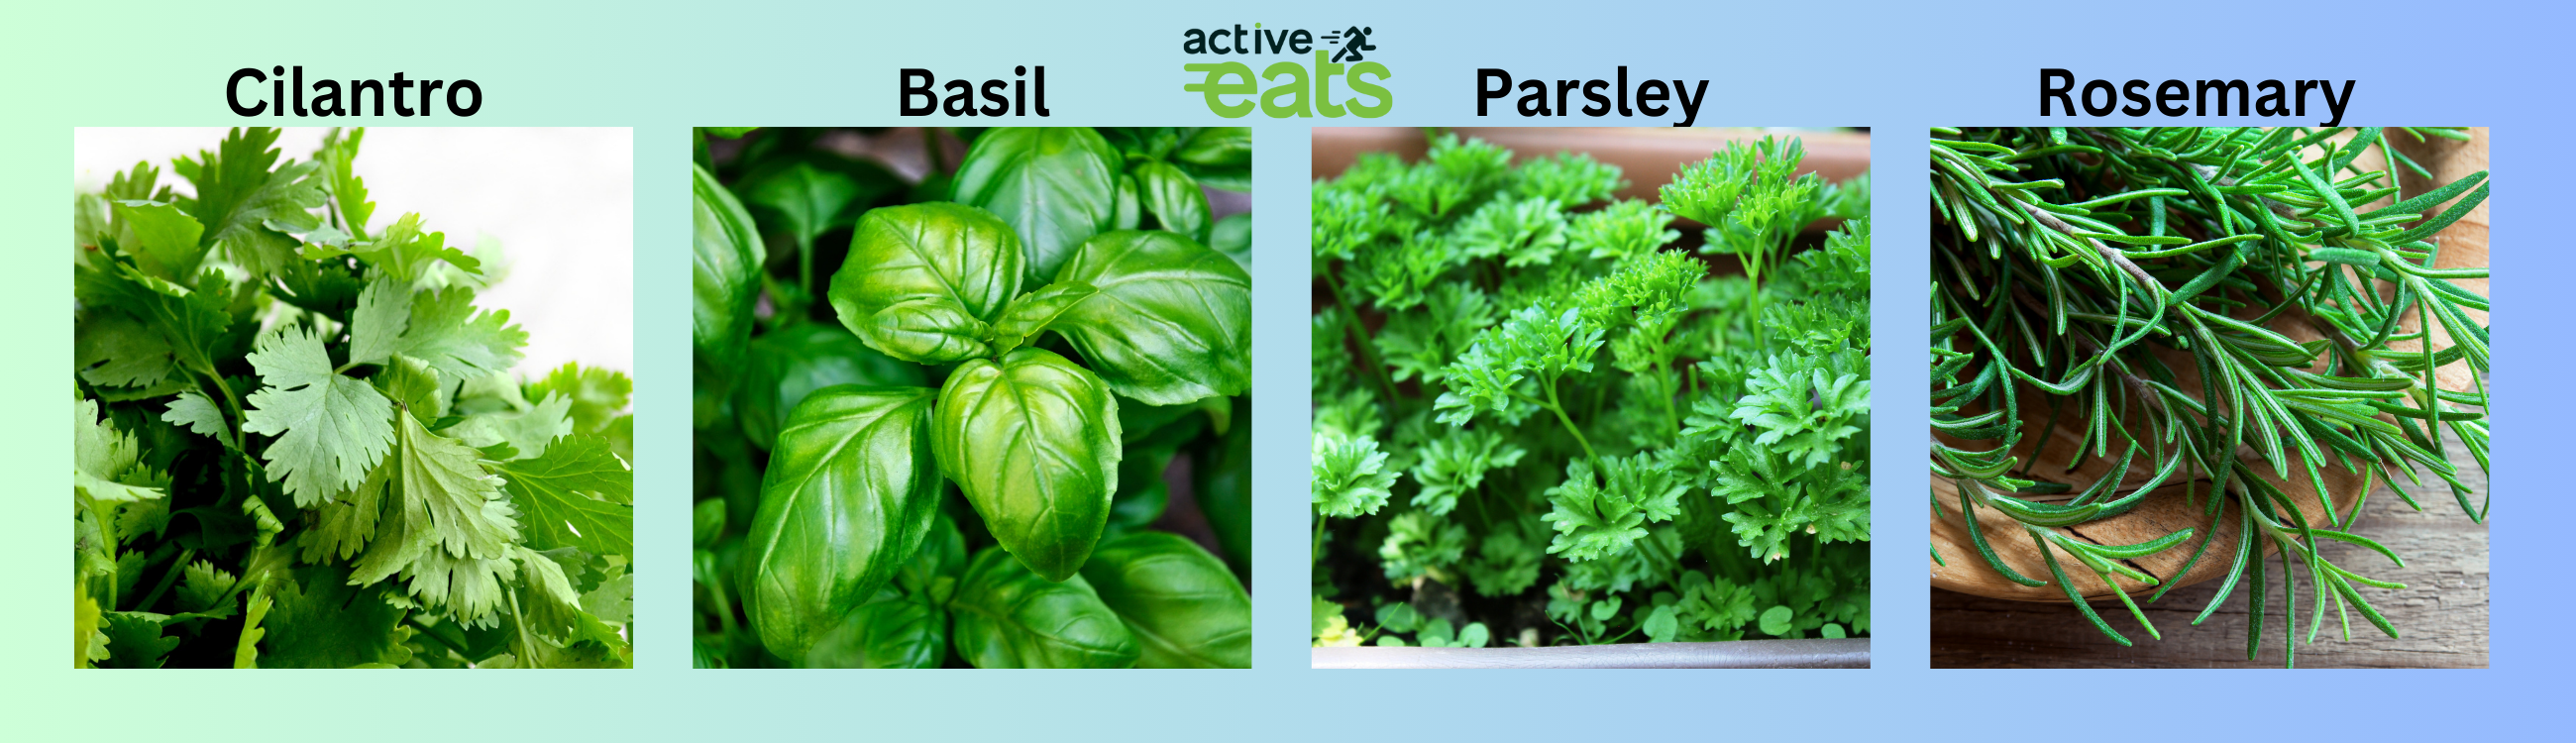 Picture of cilantro, basil, rosemary, and parsley